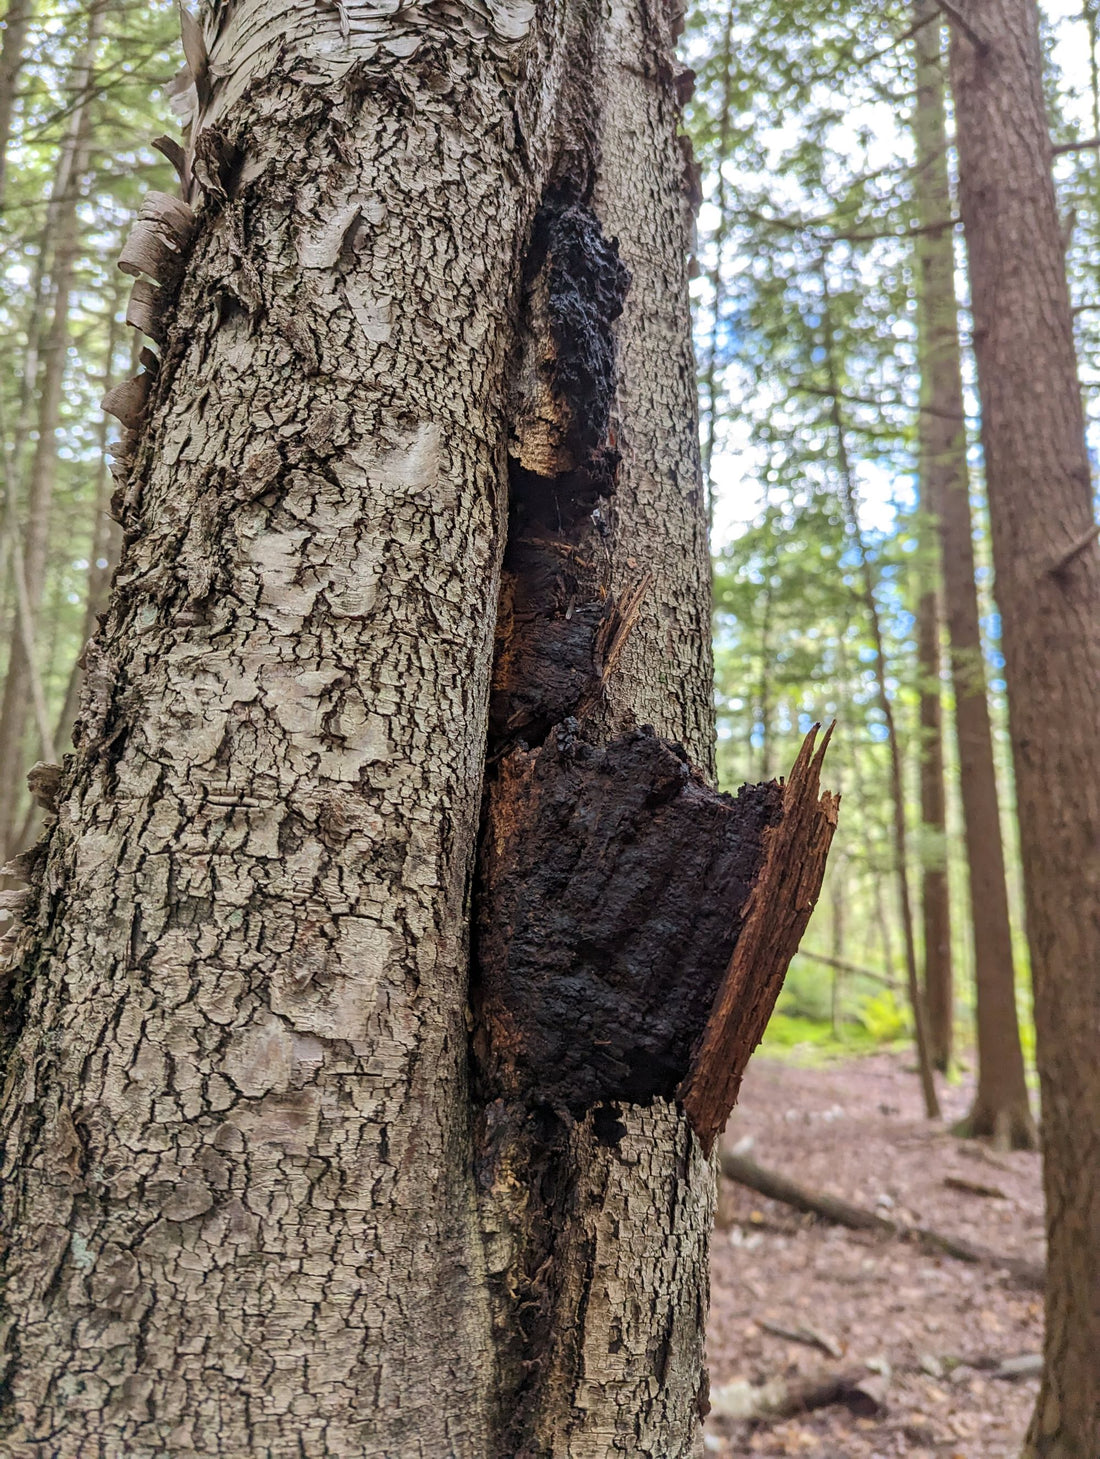 Herb of the Month: Chaga